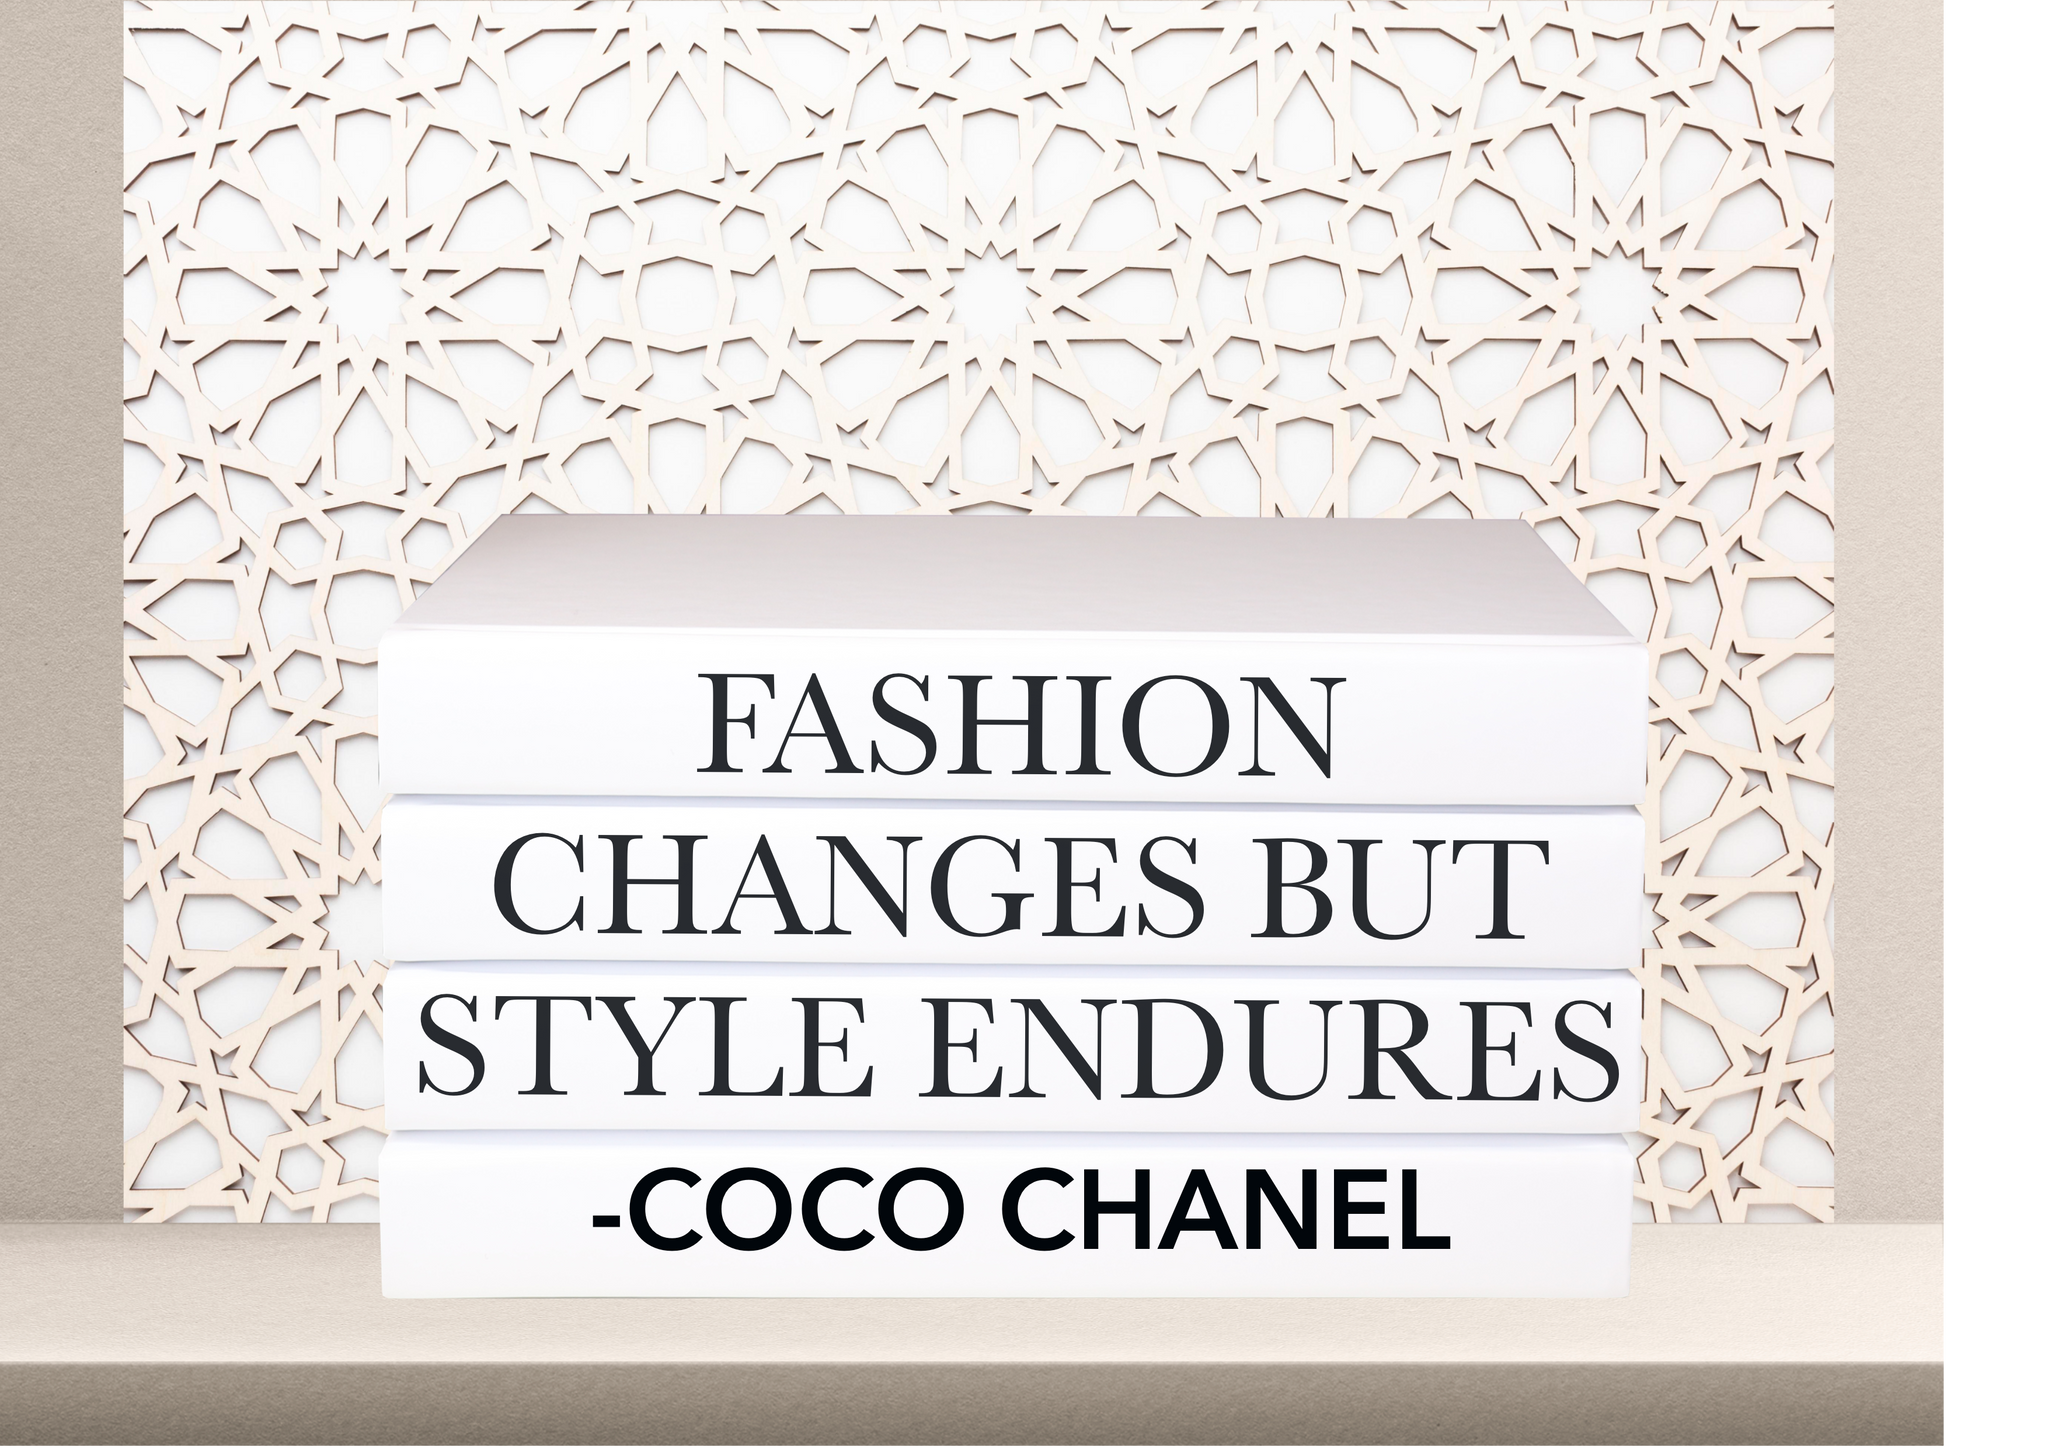 Fashion changes but style endures - Coco Chanel  - Home decor